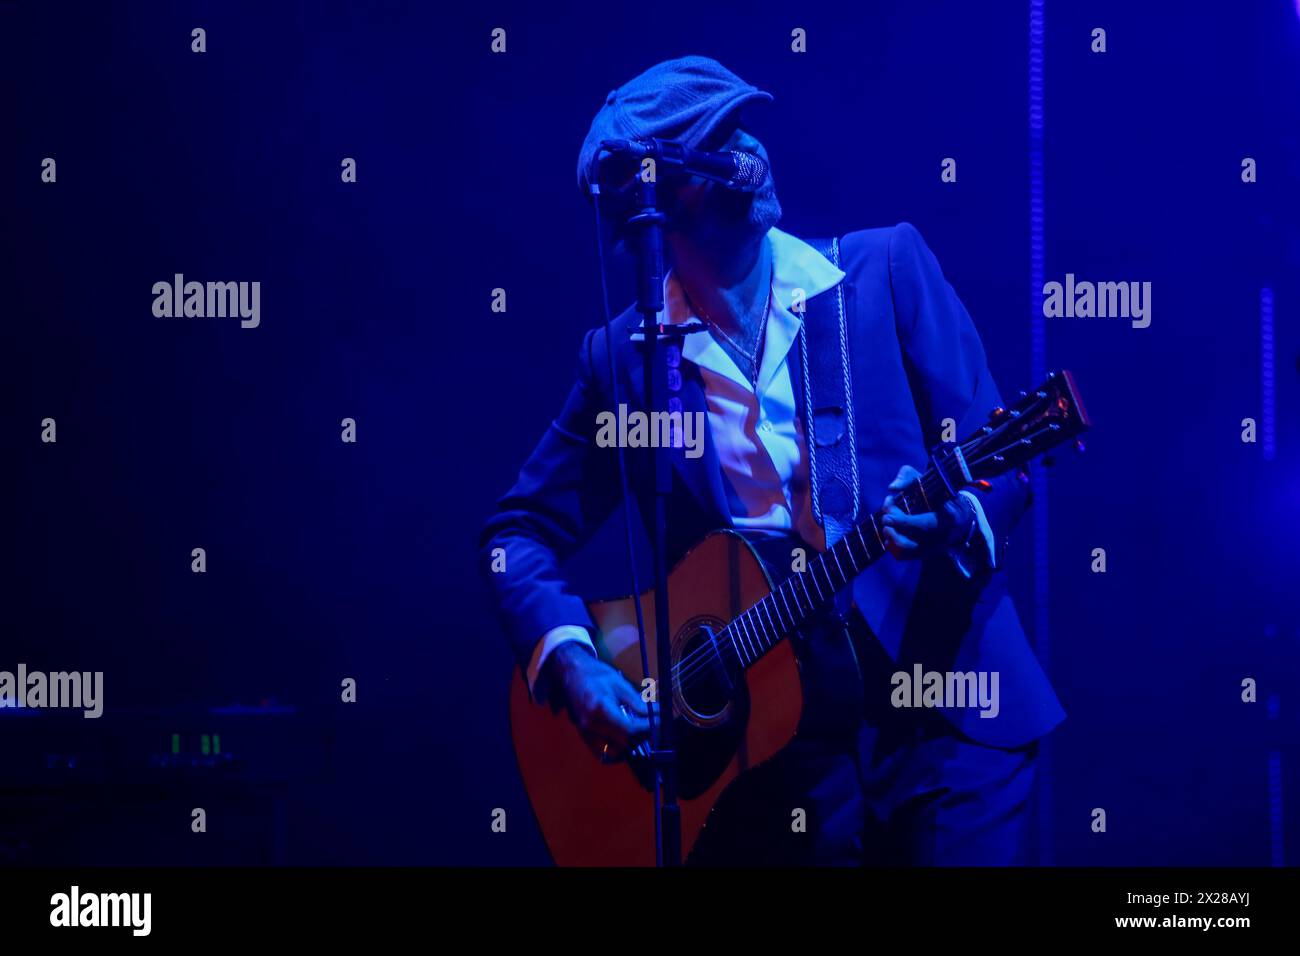 Gijón, Spain, April 20th, 2024: Singer and guitarist, Juancho Conejo singing during the Sidecars Concert at the Airplane Mode Theater Tour, on April 20, 2024, at the Teatro de La Laboral, in Gijón, Spain. Credit: Alberto Brevers / Alamy Live News. Stock Photo